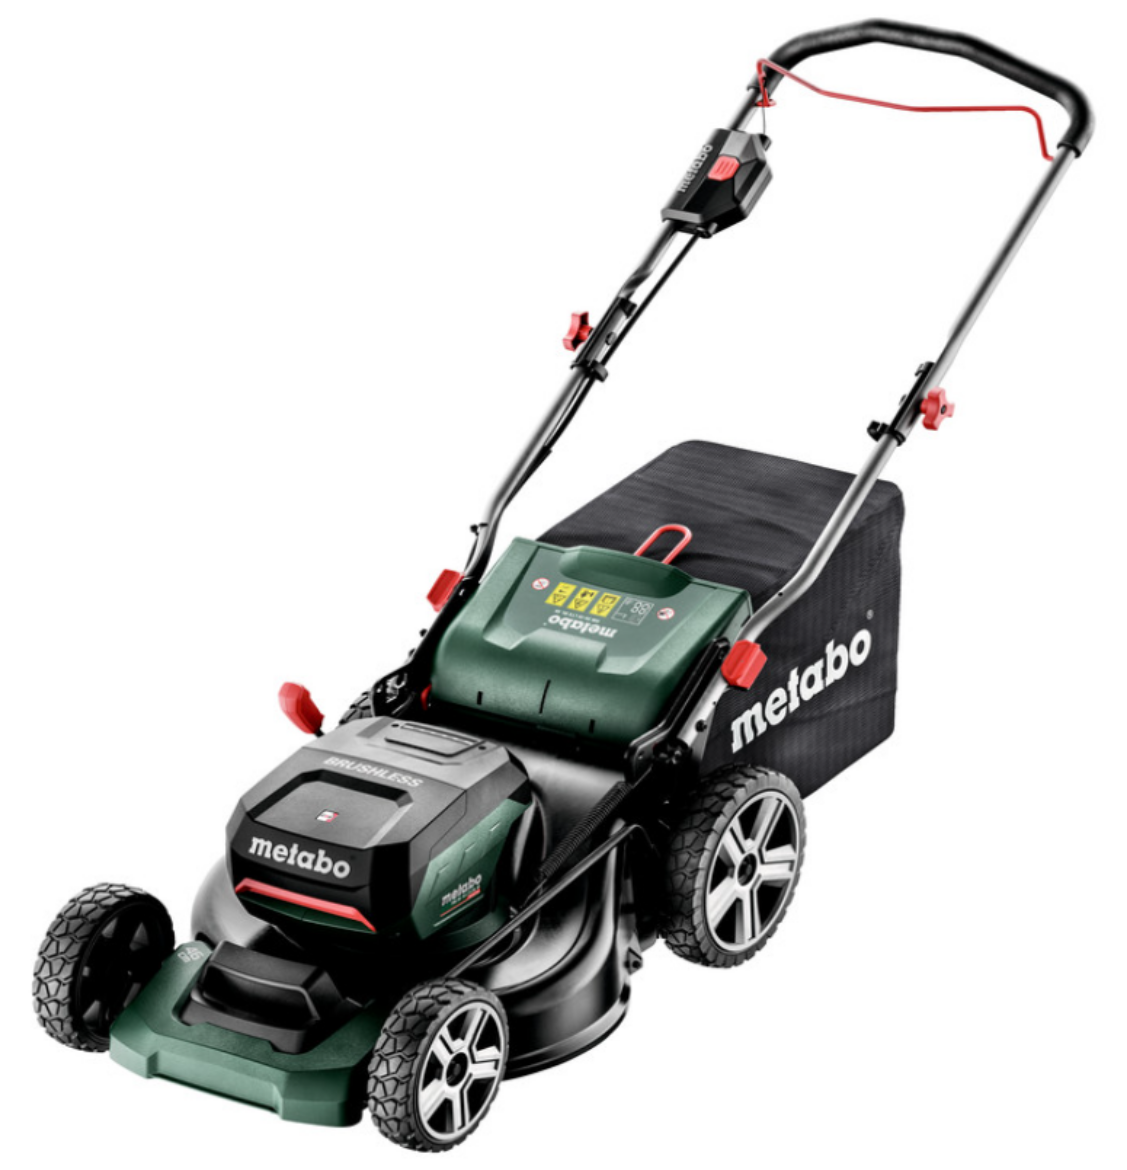 Picture of METABO 18 V BRUSHLESS CORDLESS LAWN MOWER - SKIN ONLY - RM 36-18 LTX BL 46